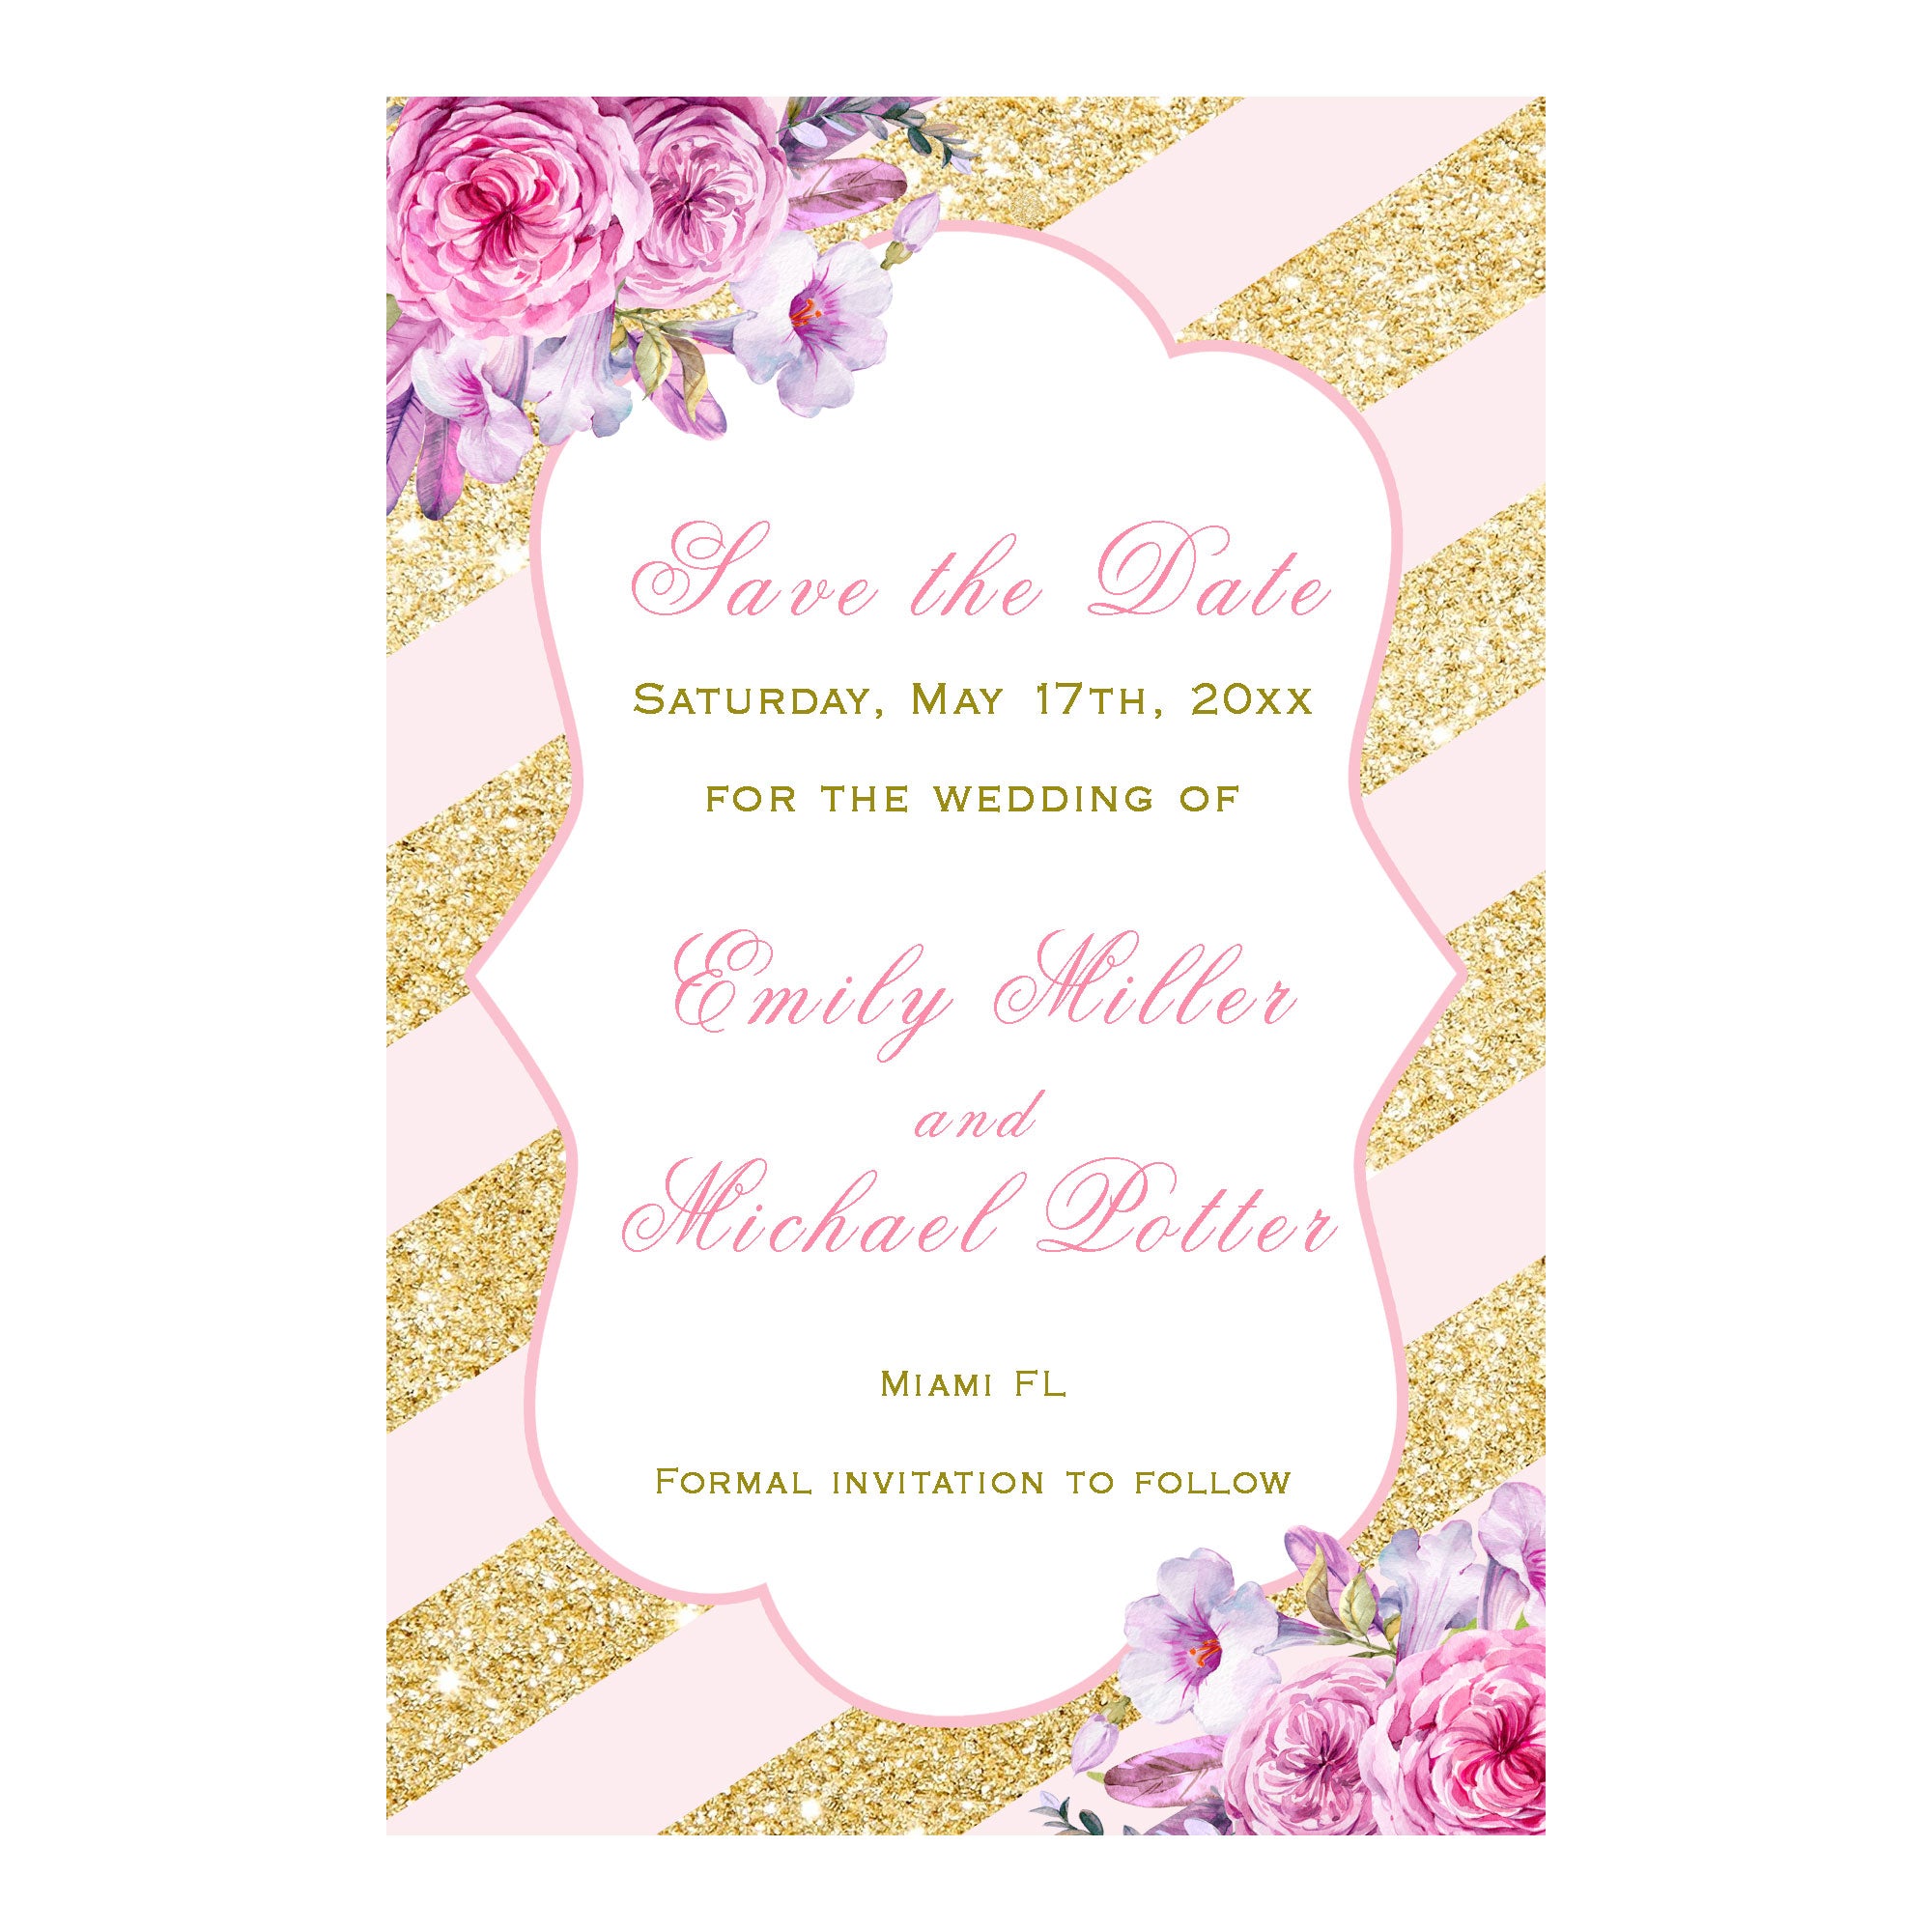 Save the date cards blush pink gold floral wedding